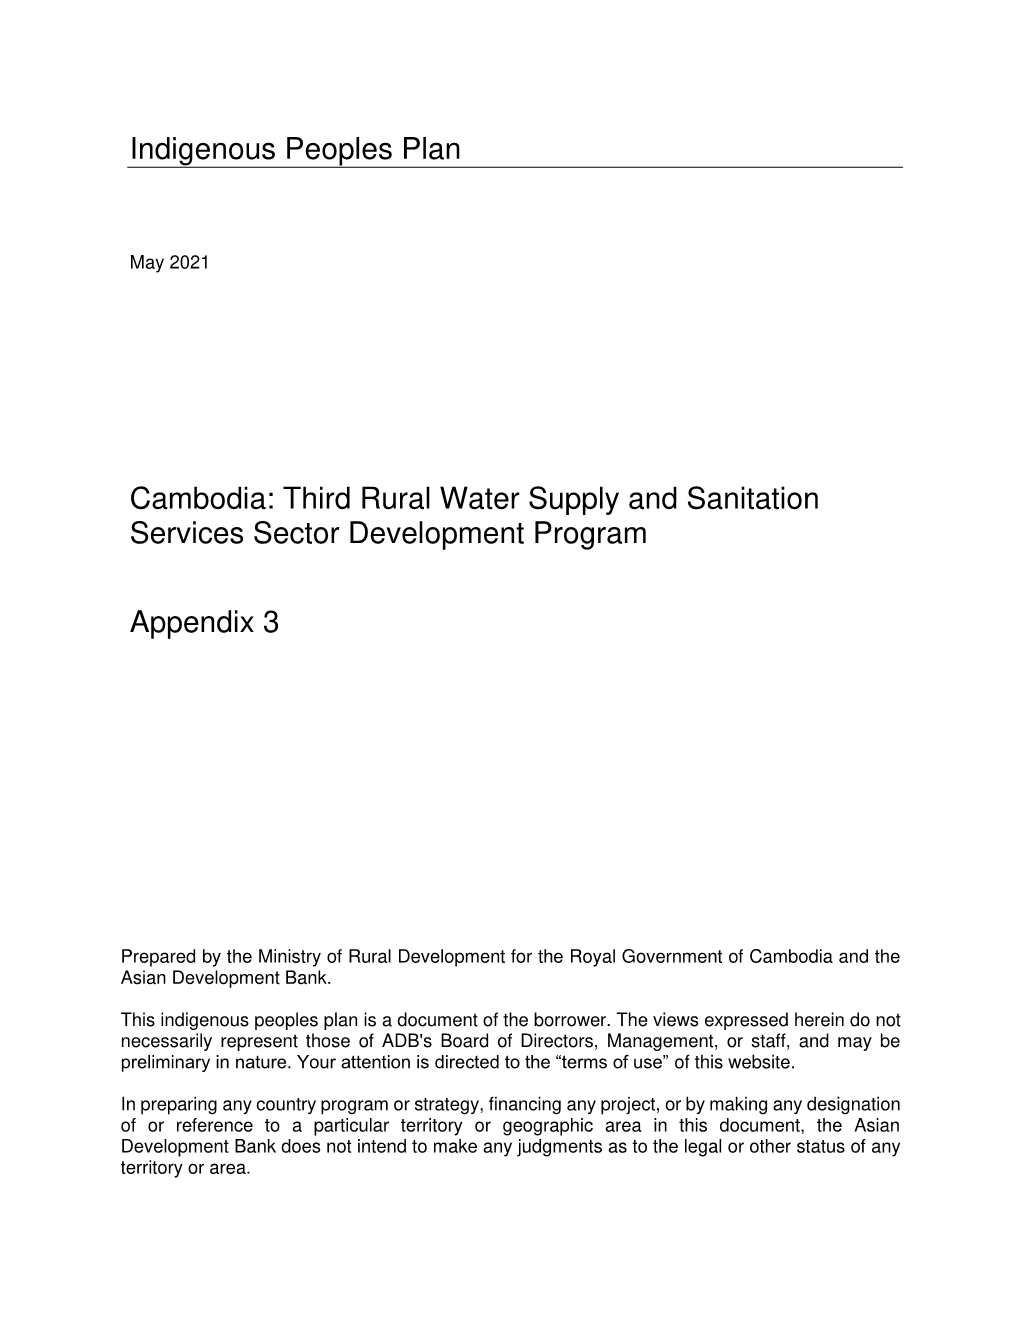 Indigenous Peoples Plan Cambodia: Third Rural Water Supply And